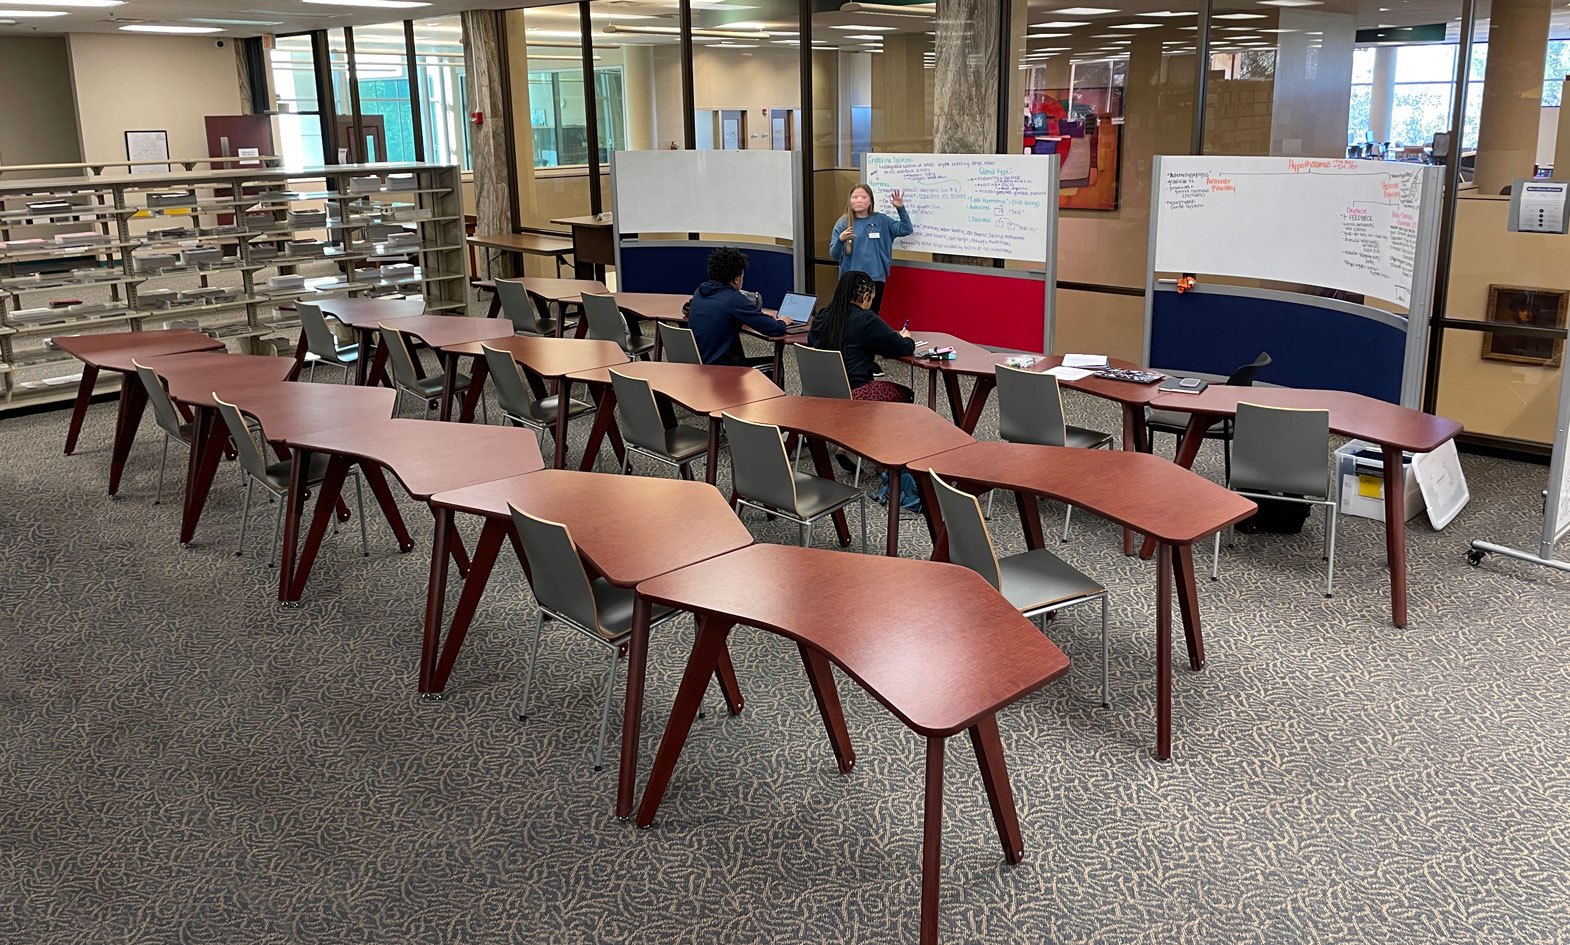 Student Success Center with flexible tables in University classroom setting